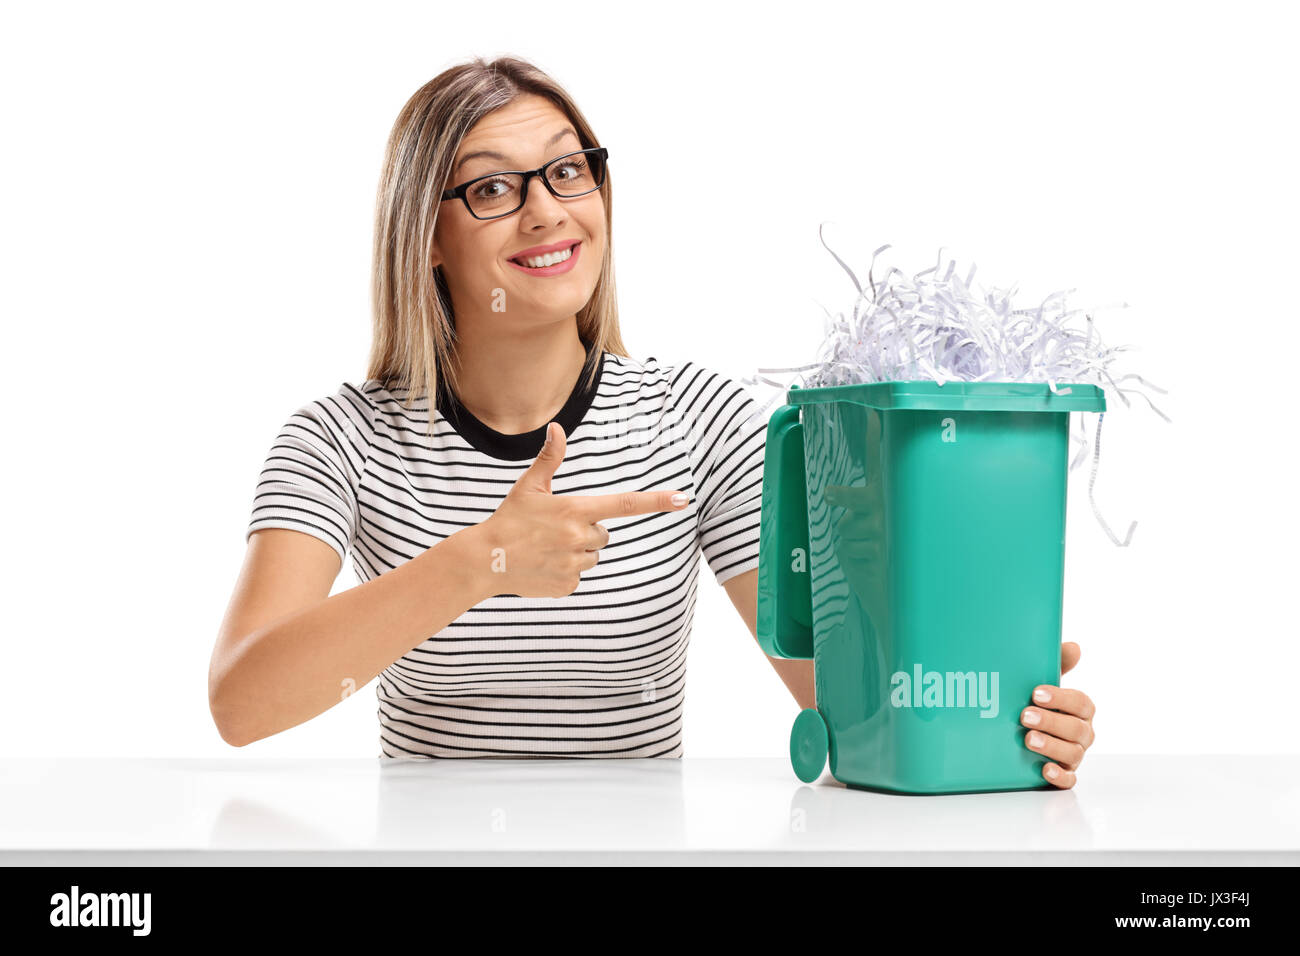 Young woman sitting at a table and pointing at a garbage bin full of shredded paper isolated on white background Stock Photo